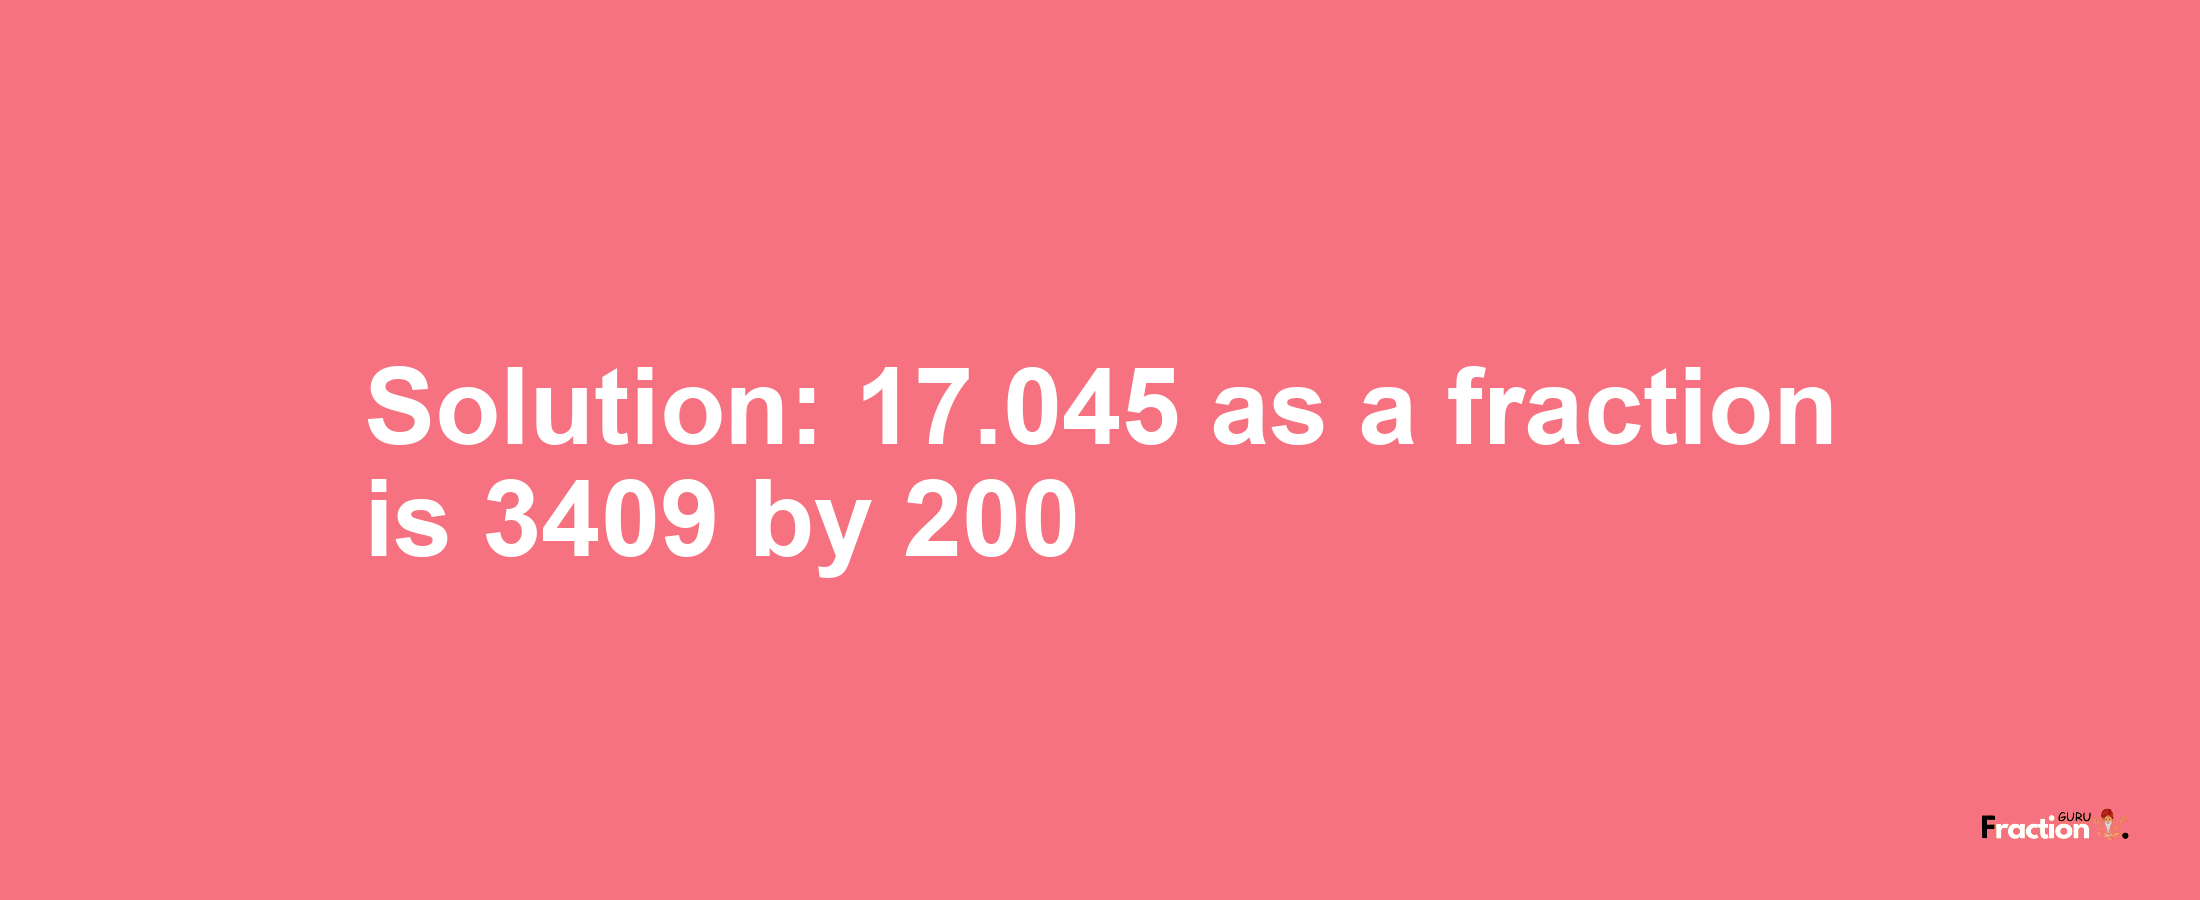 Solution:17.045 as a fraction is 3409/200